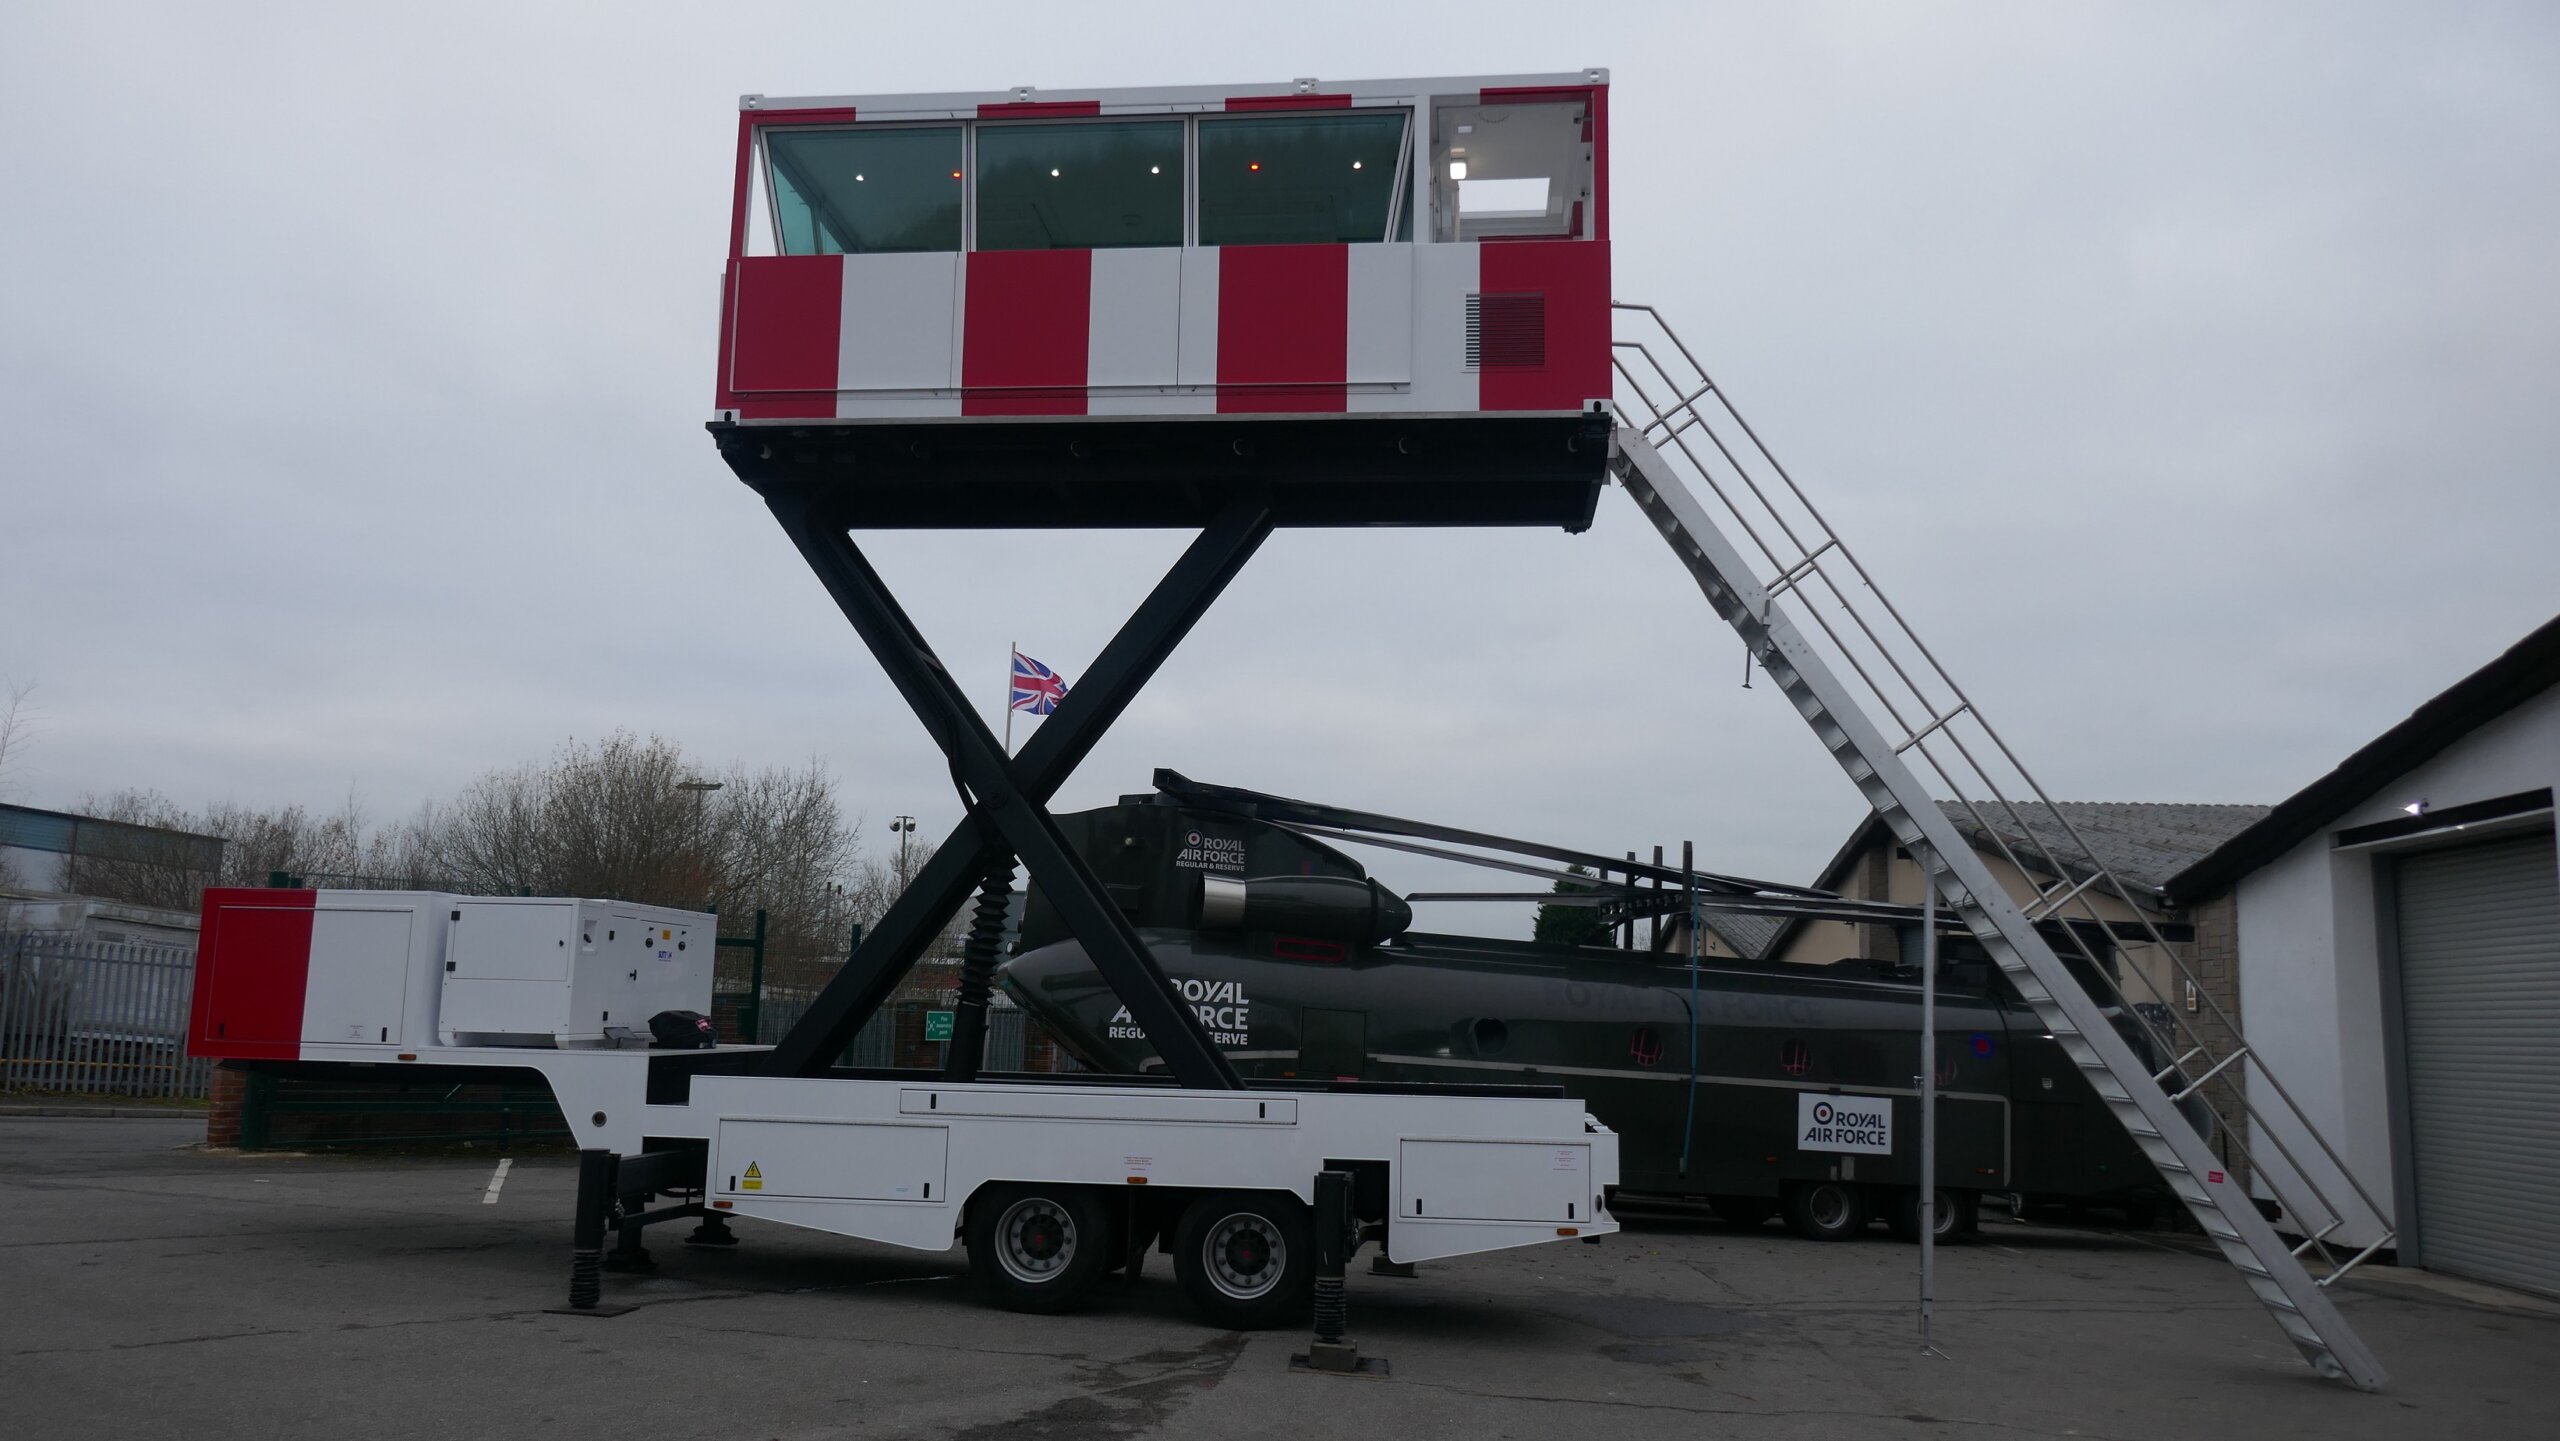 Civil Aviation Mobile Air Traffic Control Trailer with removable cabin, half height and full height elevation